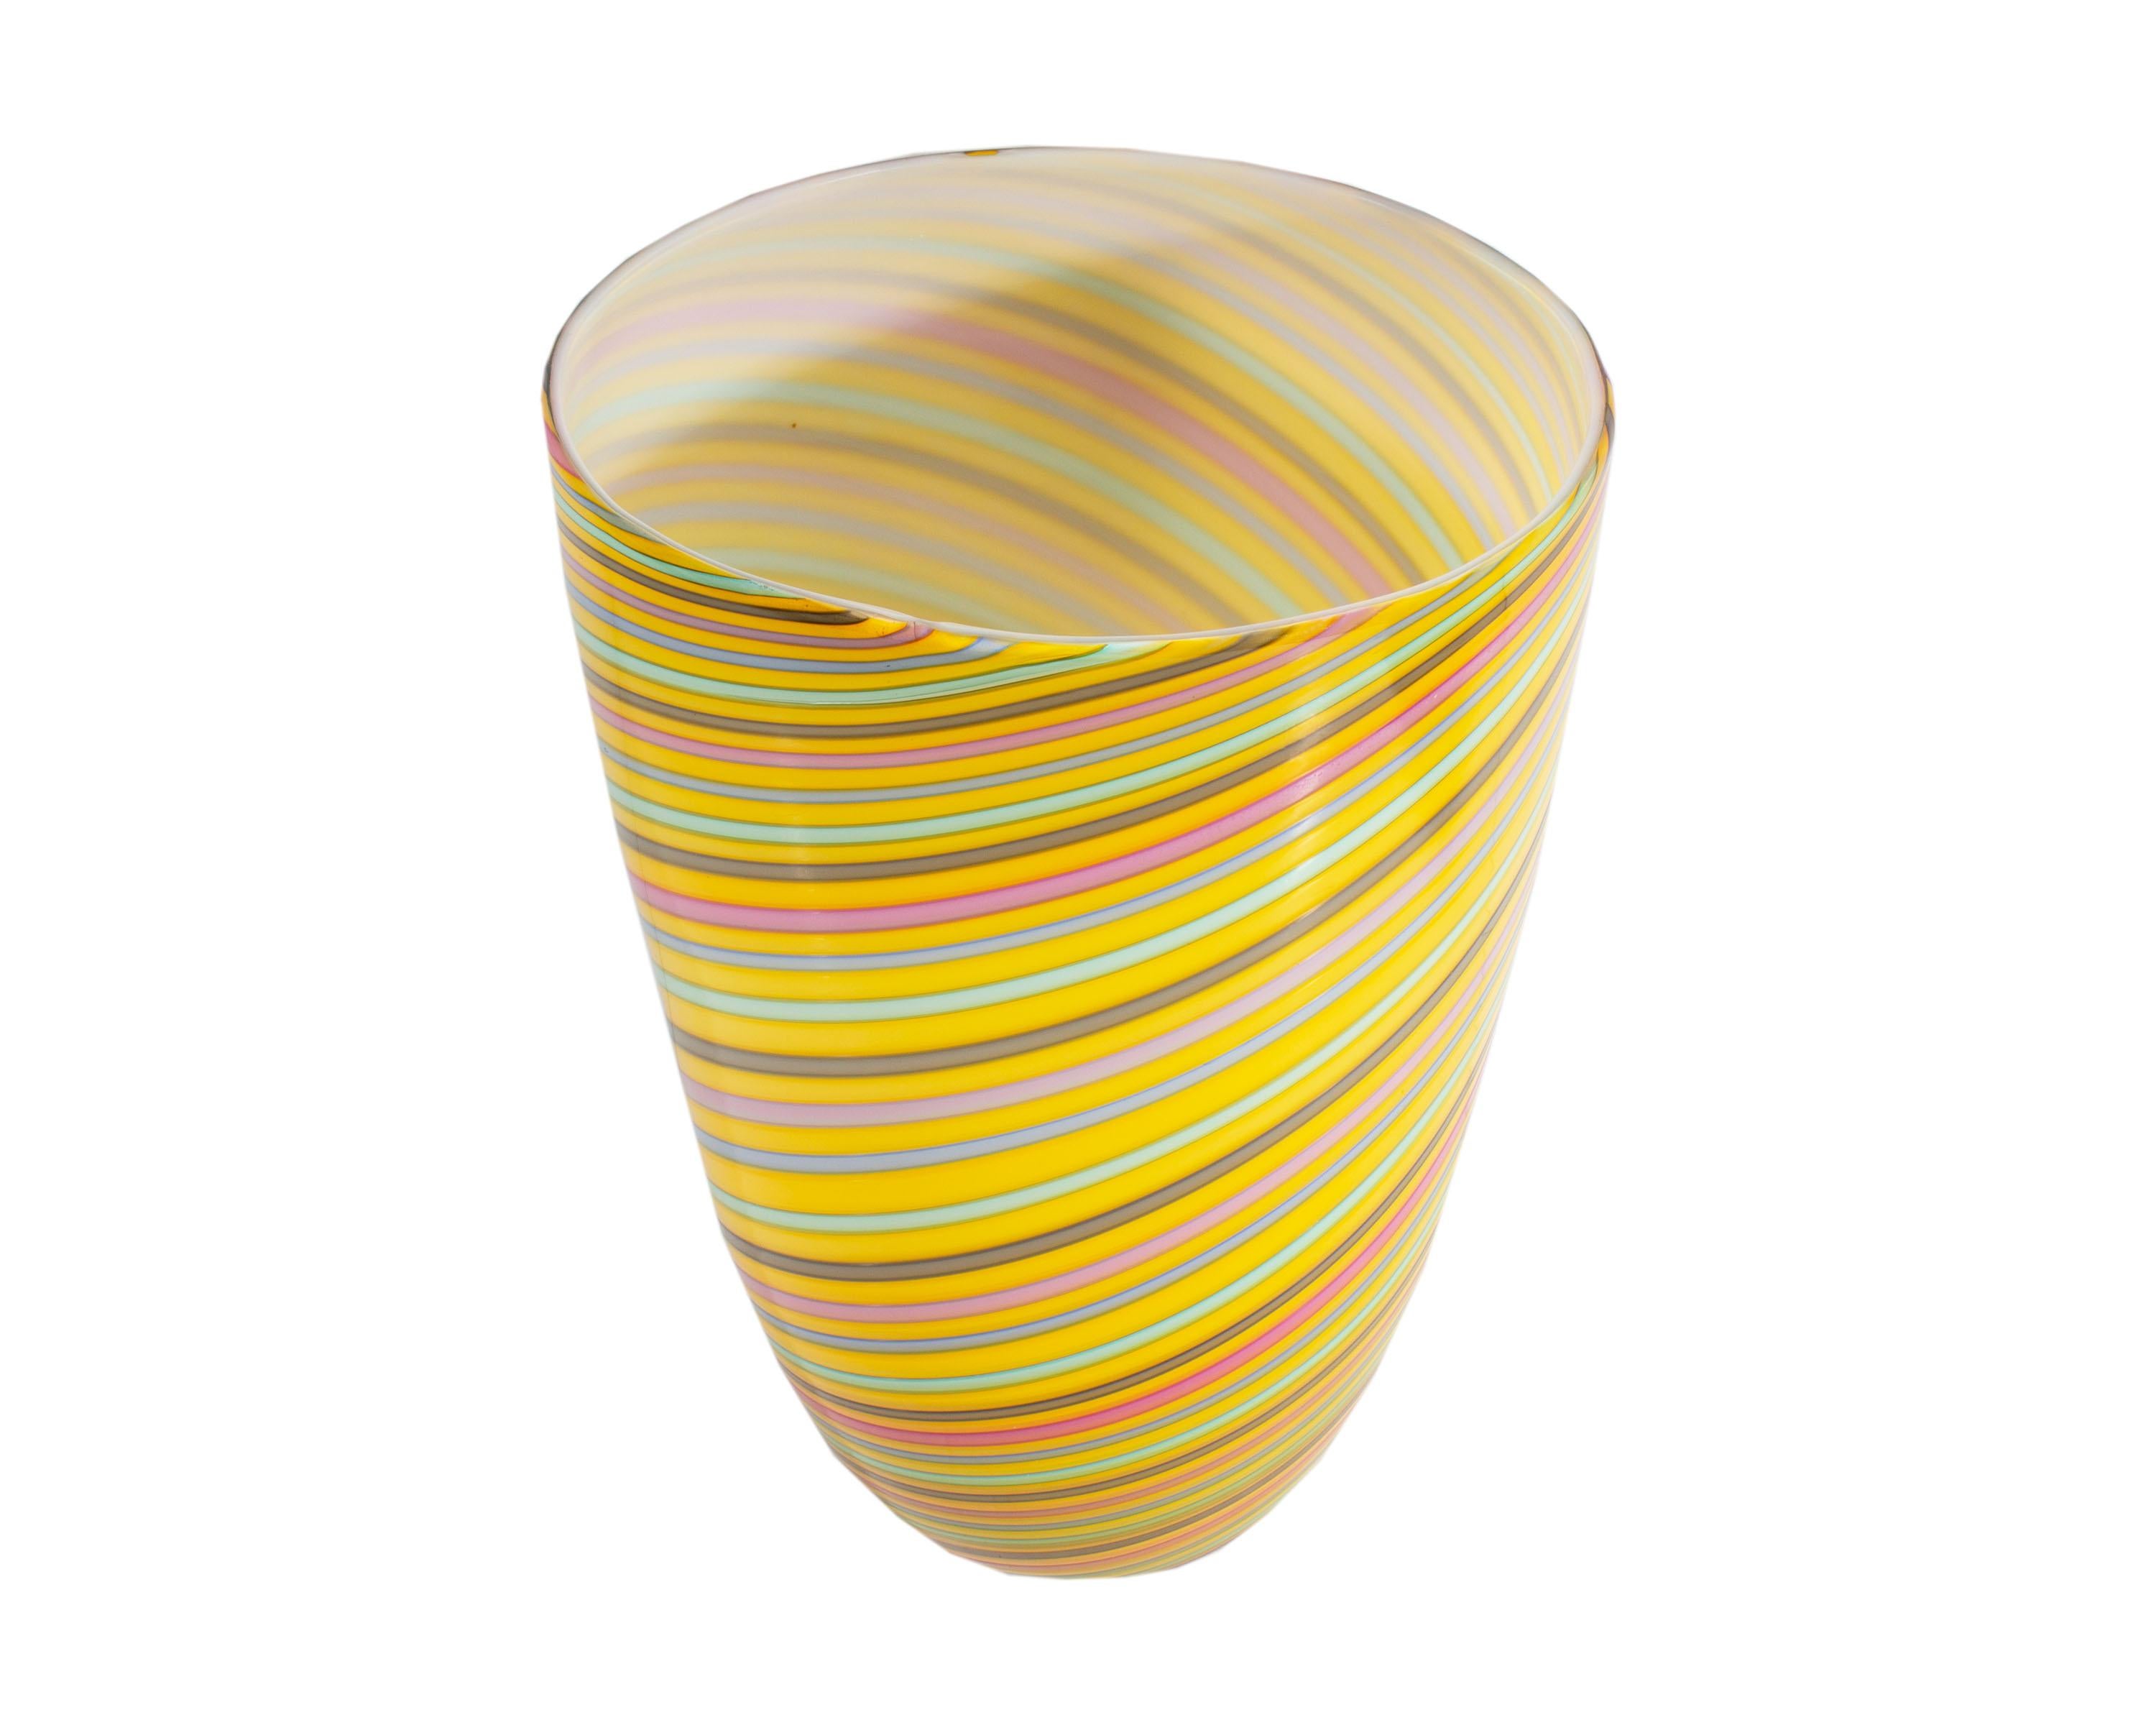 A vintage Murano art glass vase by Cenedese. Made in Italy, the oval tapered vase features alternating bands of color over yellow. Evenly patterned hues of blue, green, and pink form a spiral upon the yellow and white cased vase. The vase is signed